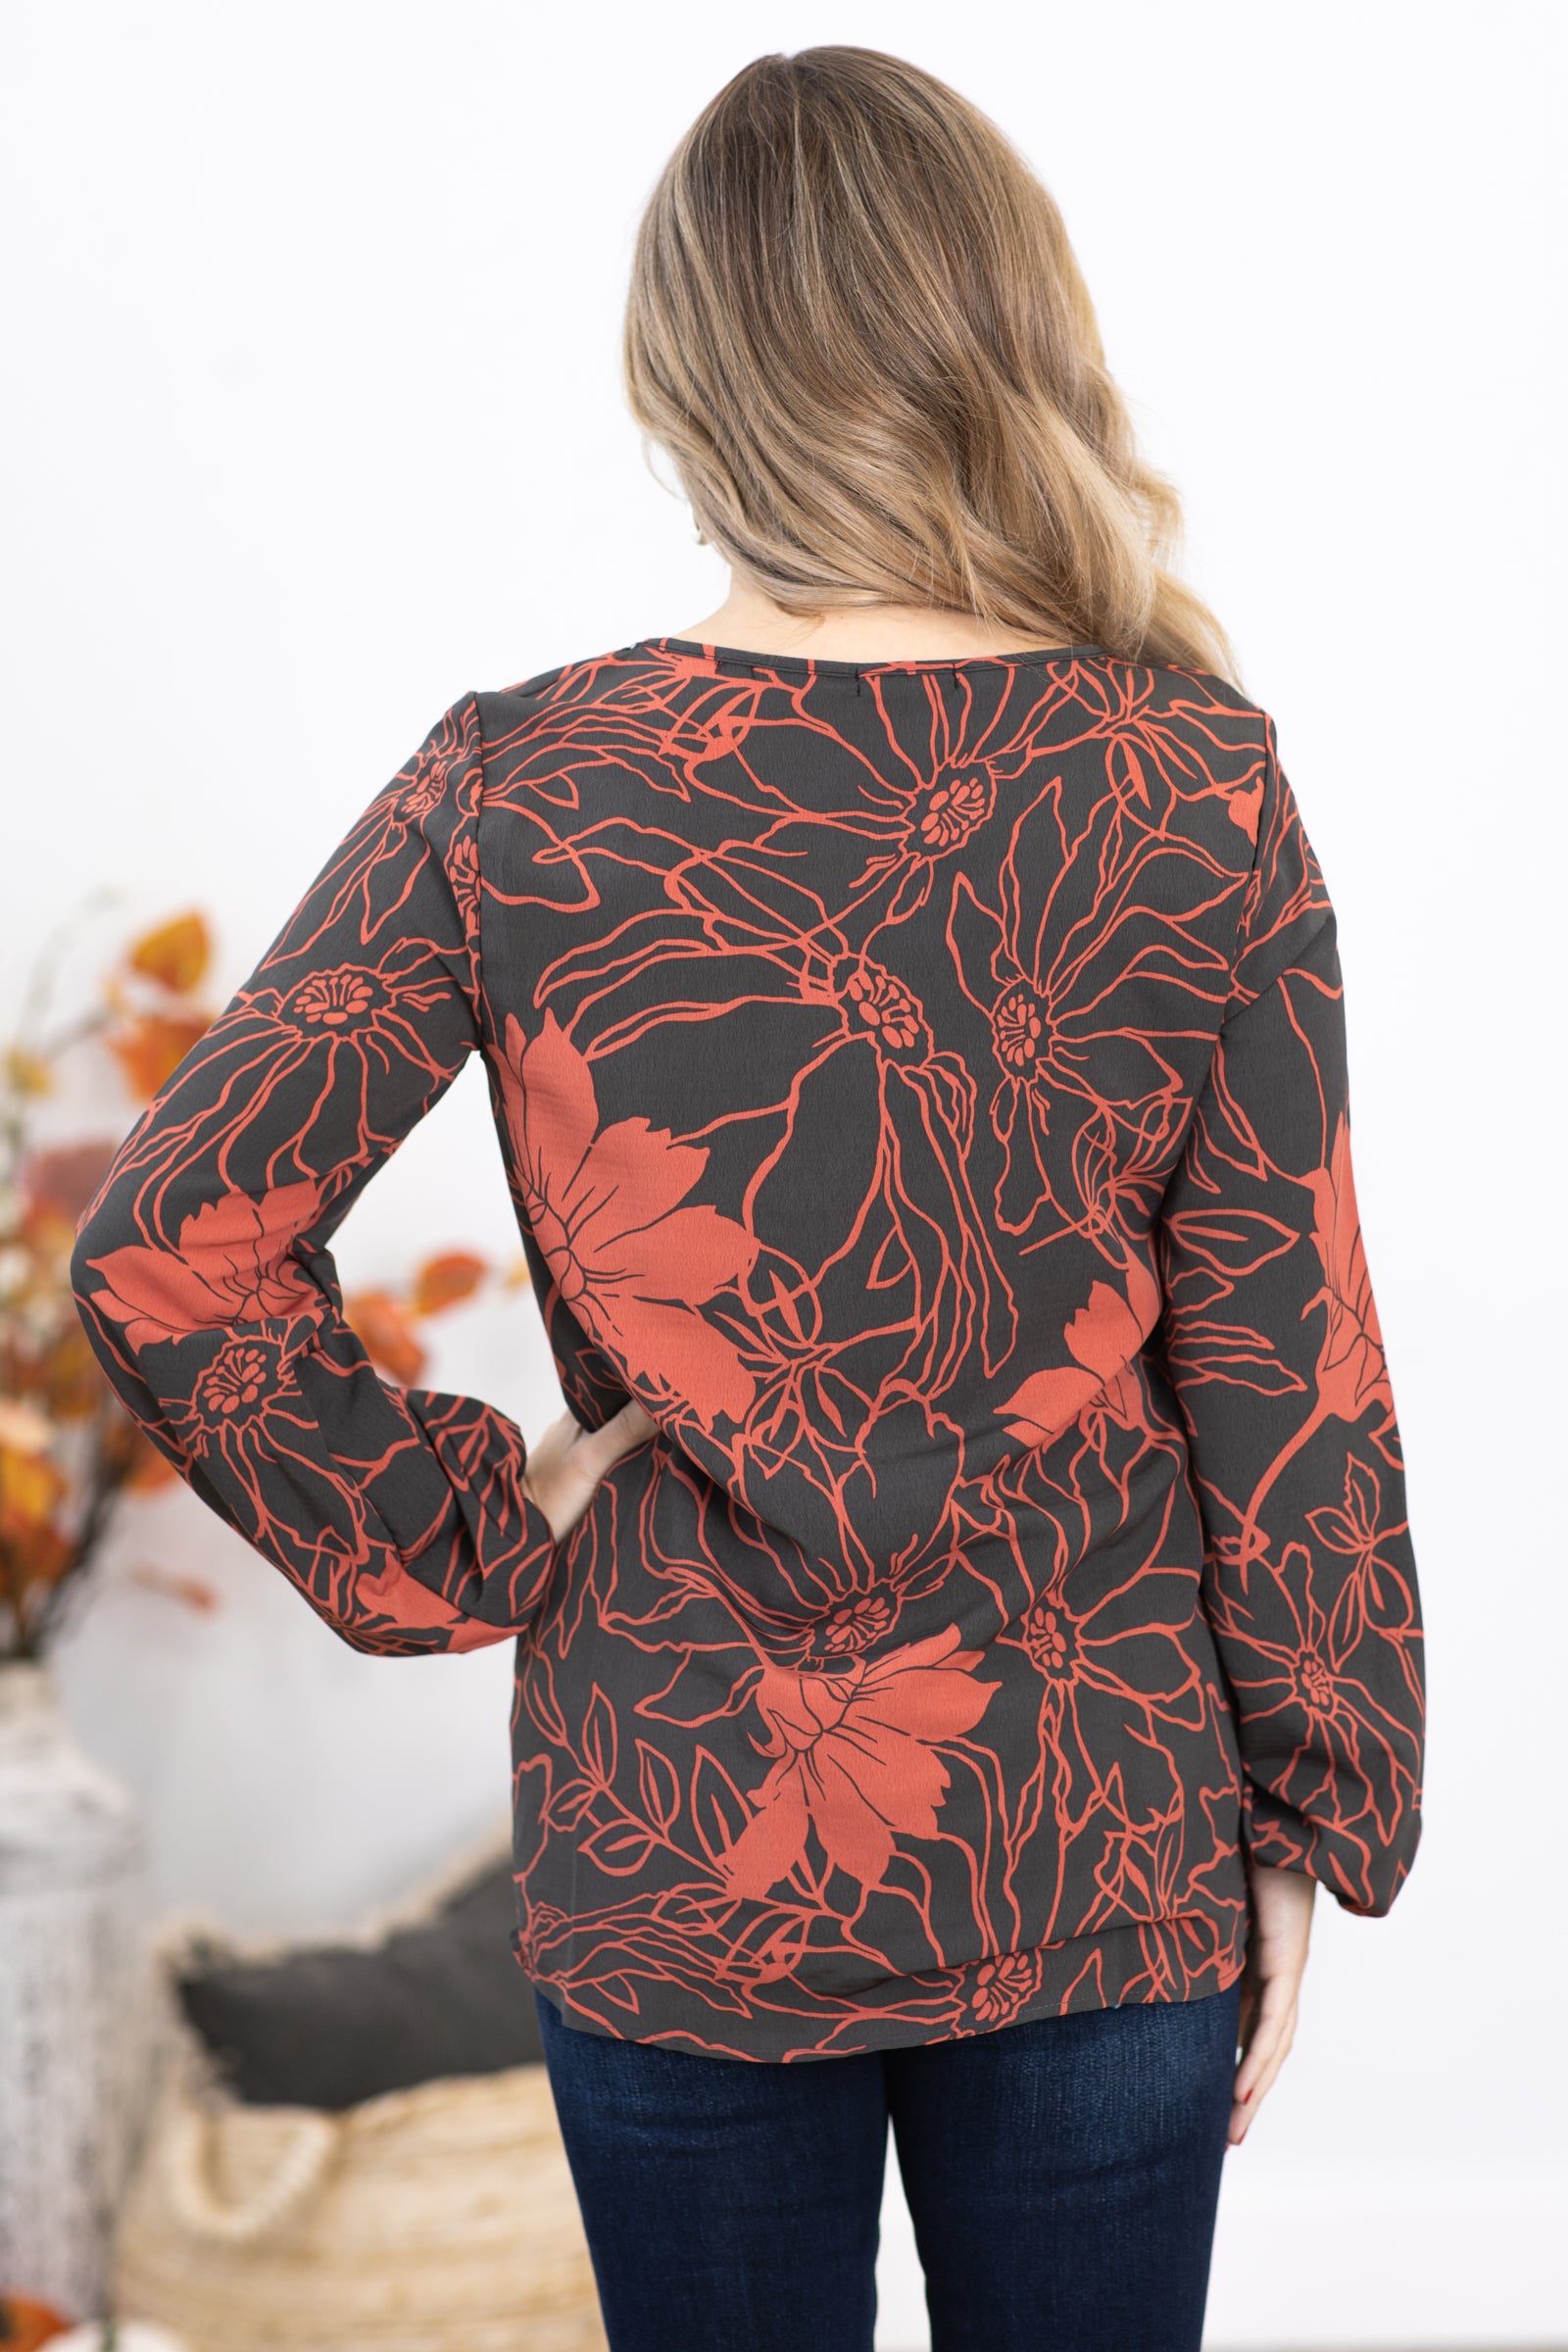 Charcoal and Terra Cotta Floral Print Top